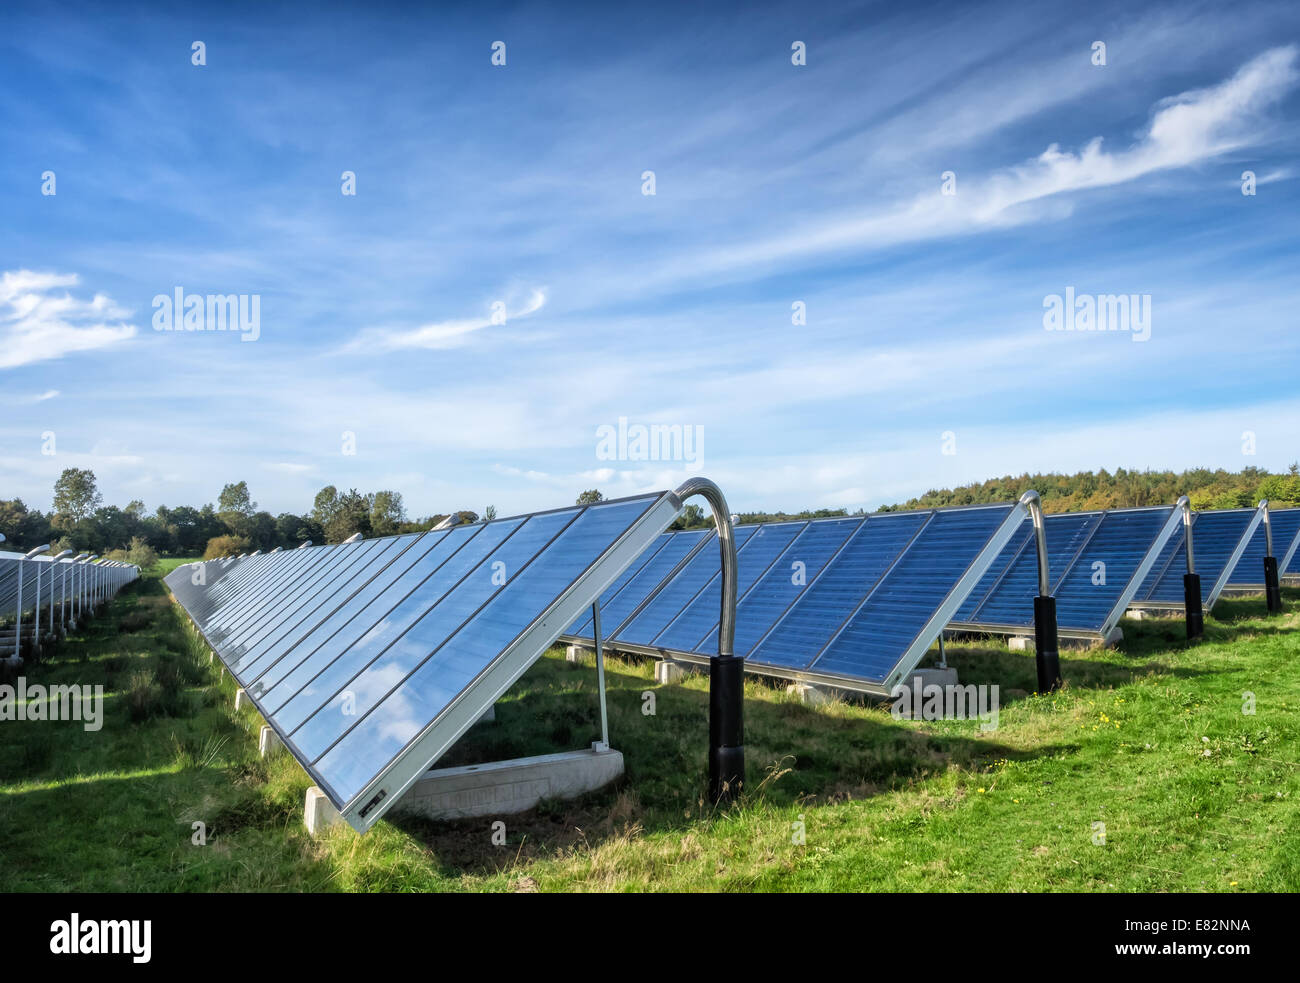 Solar water heating system in great scale Stock Photo